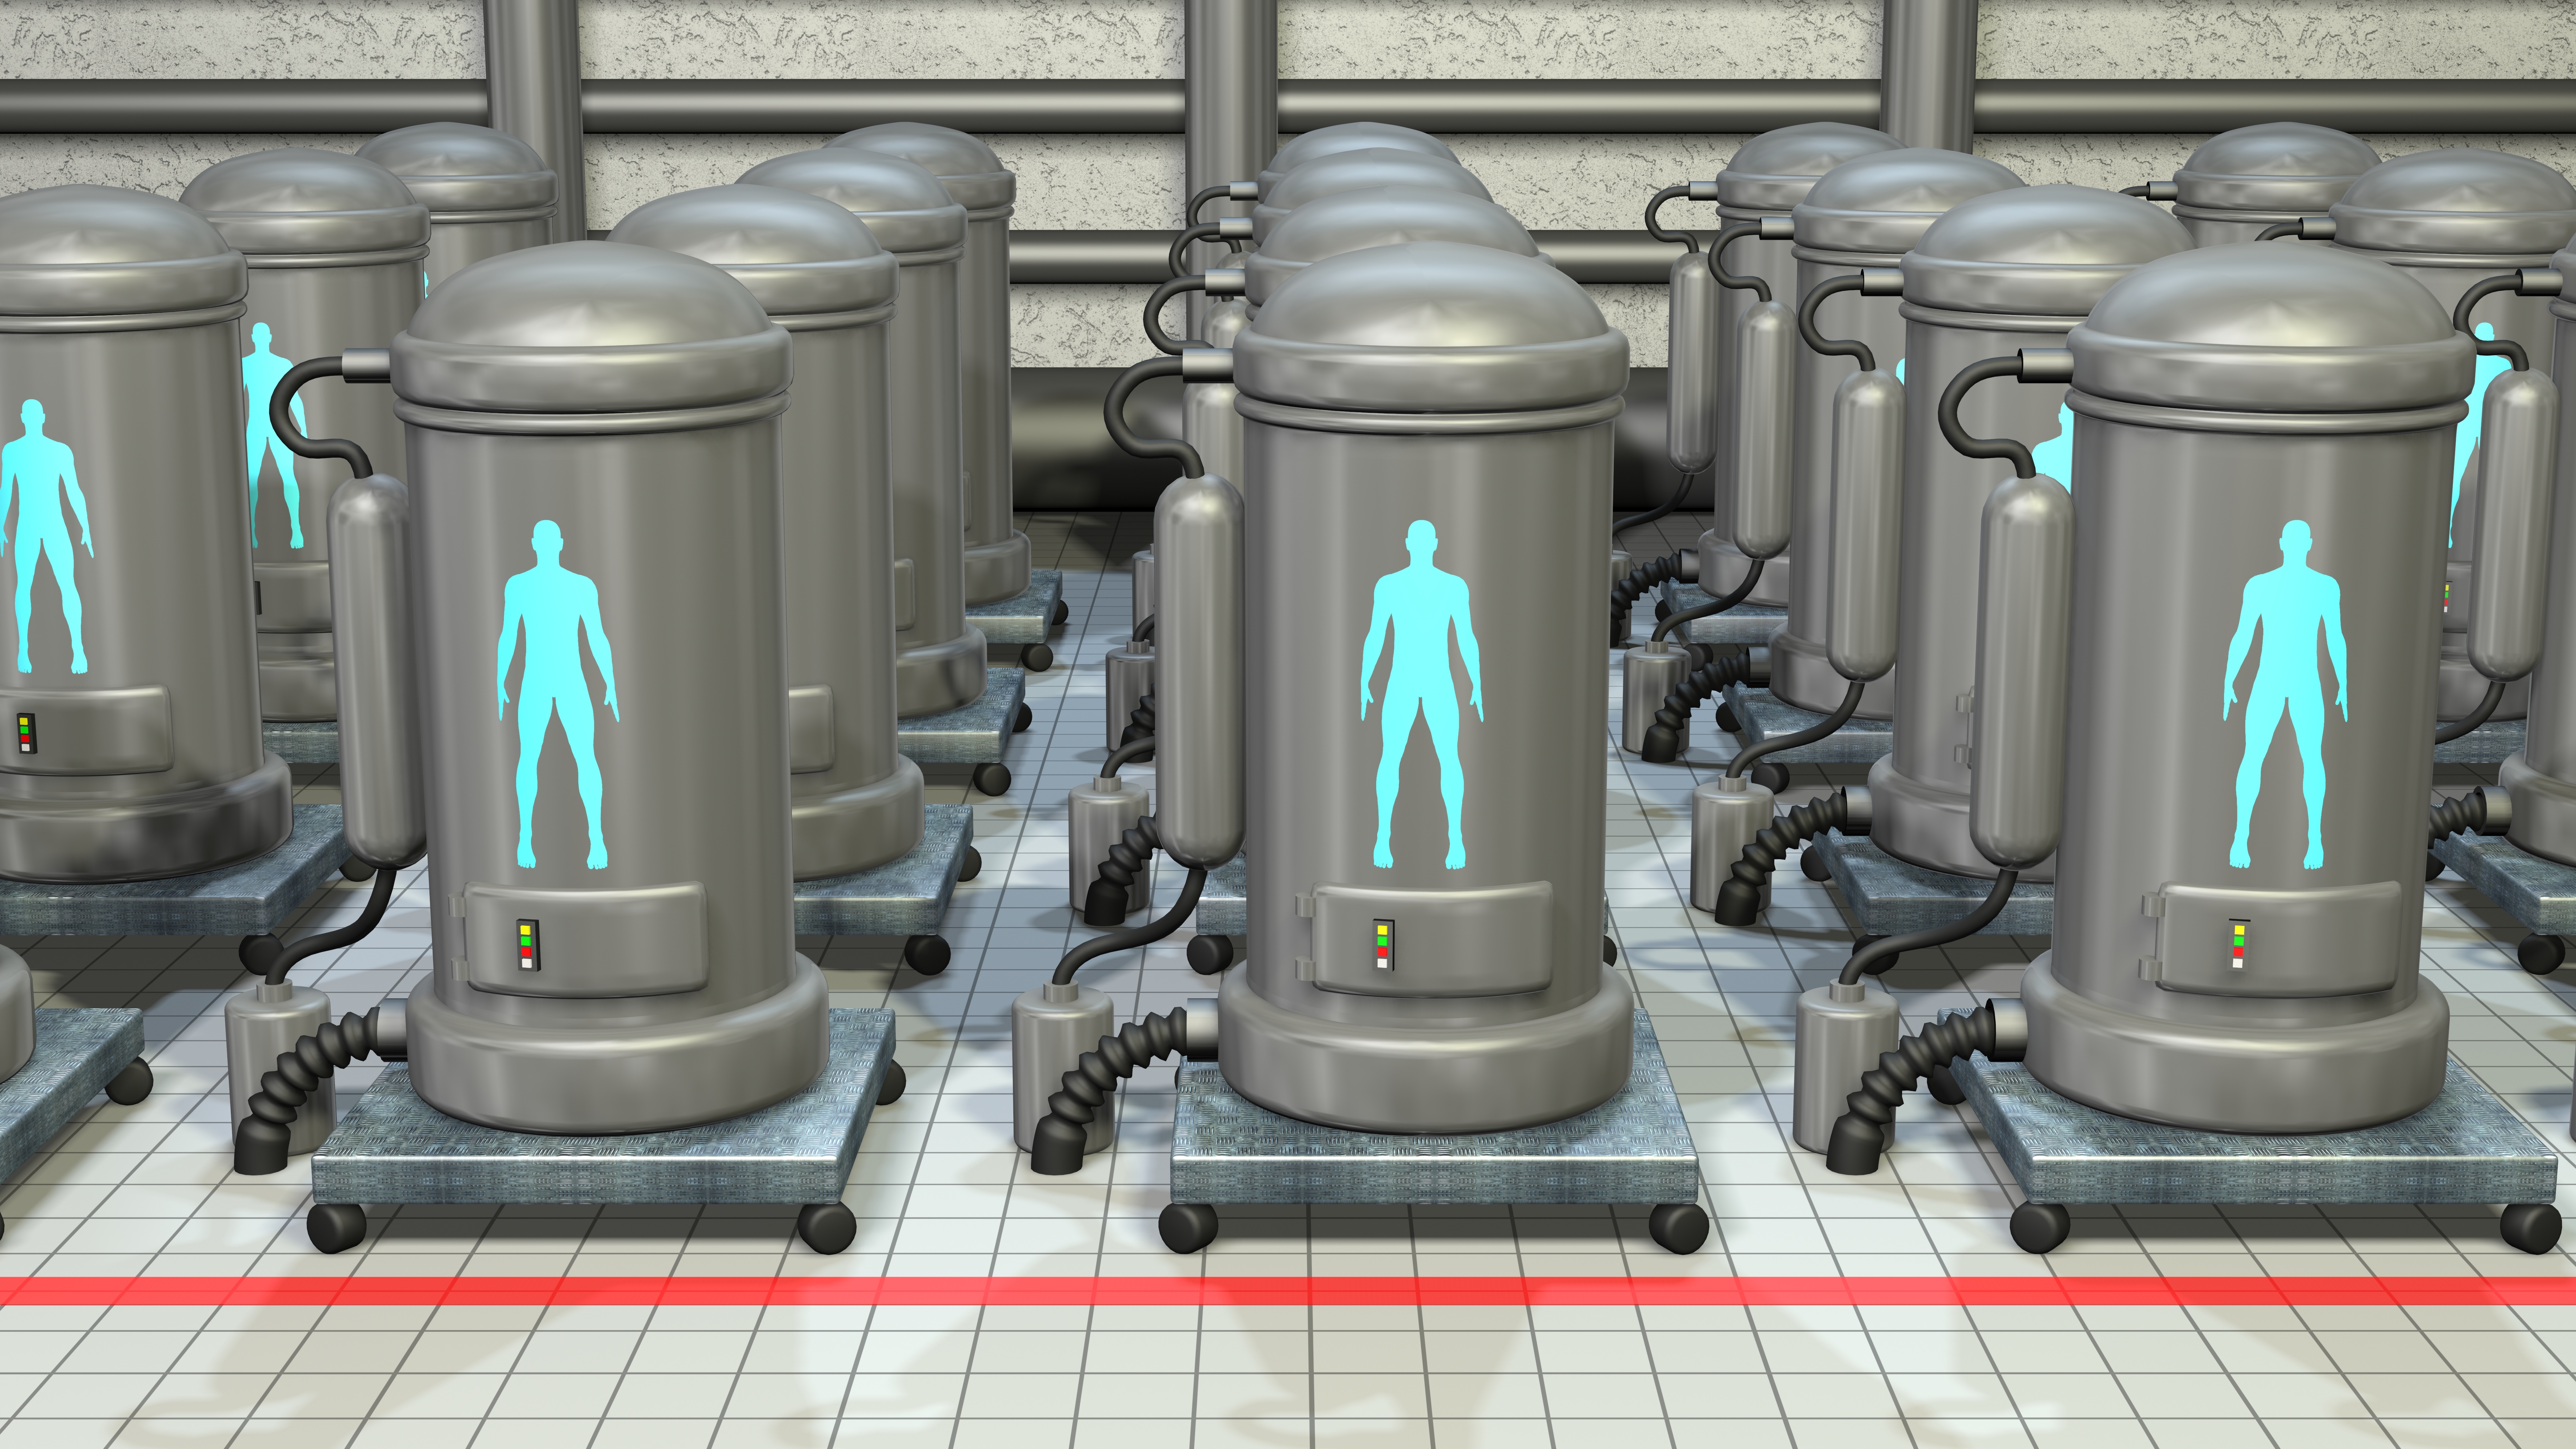 Life support chambers, cryonic tanks containing people. 3d render